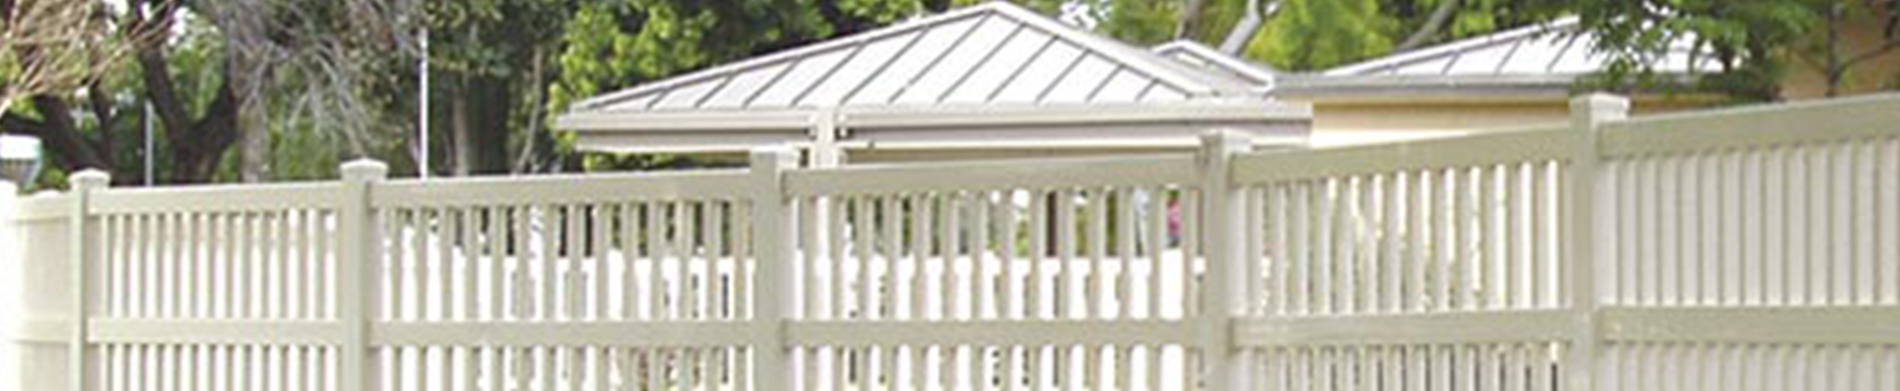 How To Keep Vinyl Fences Clean With Household Products?